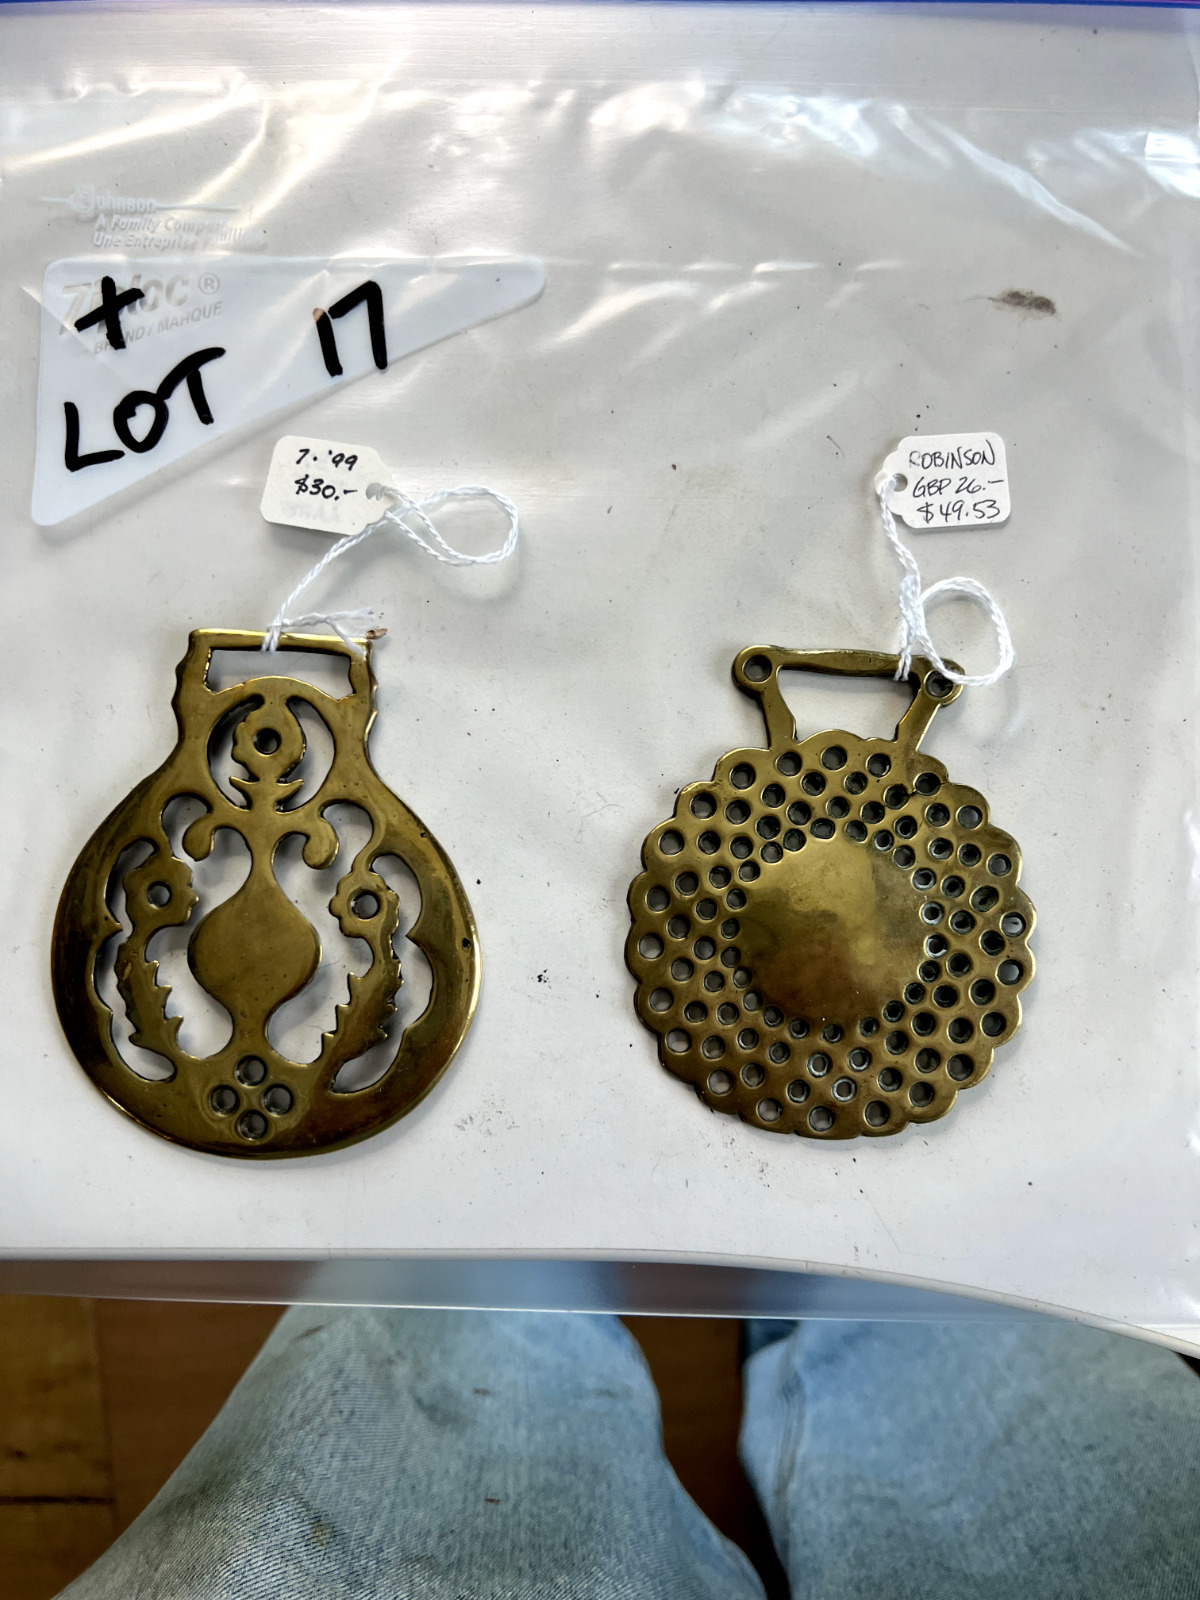 Antique Brass Horse Medallion Vintage Lot of 2 Shield Horseshoe AAHB My Lot #17